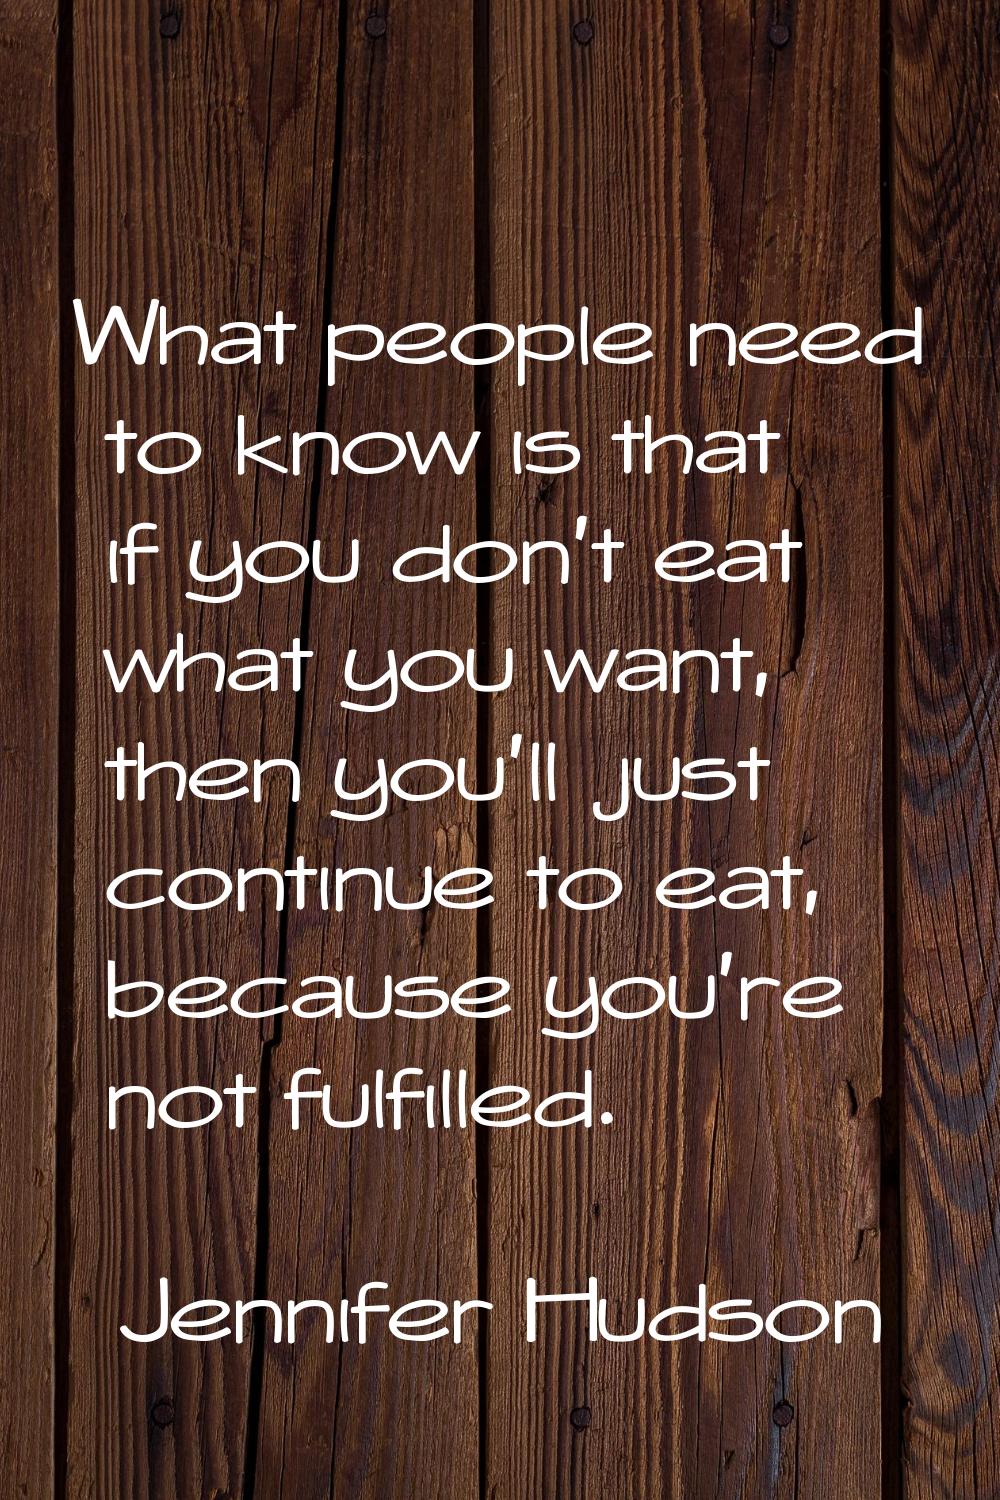 What people need to know is that if you don't eat what you want, then you'll just continue to eat, 